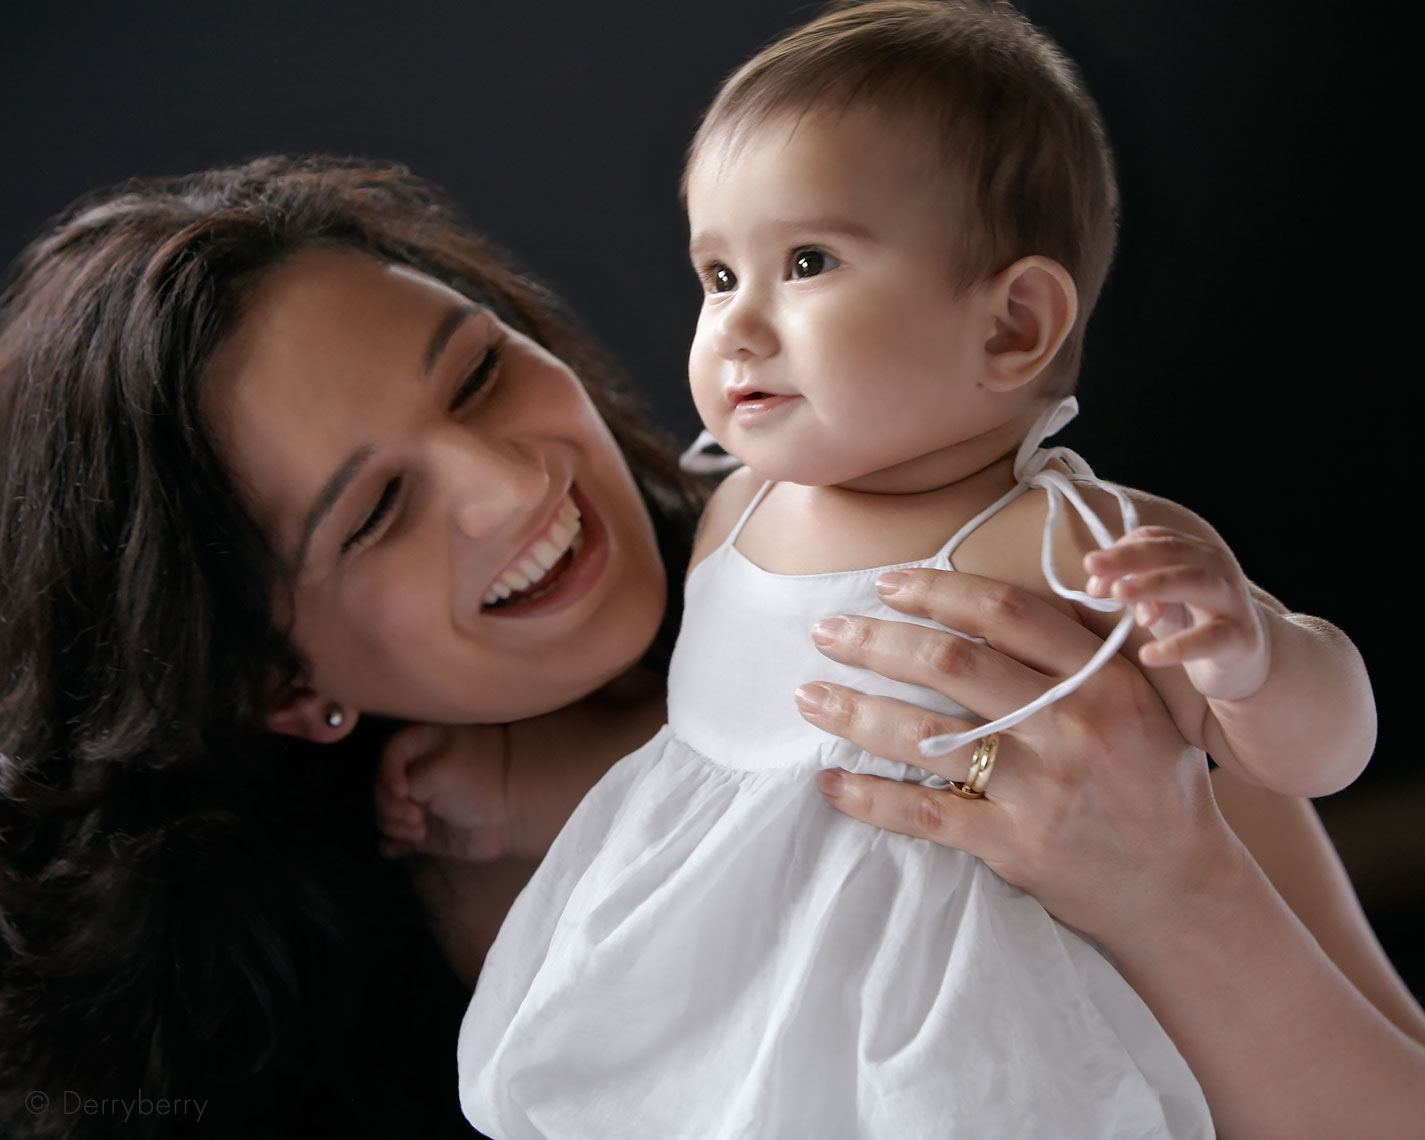 Cecilia Barron with her baby girl in the studio in color